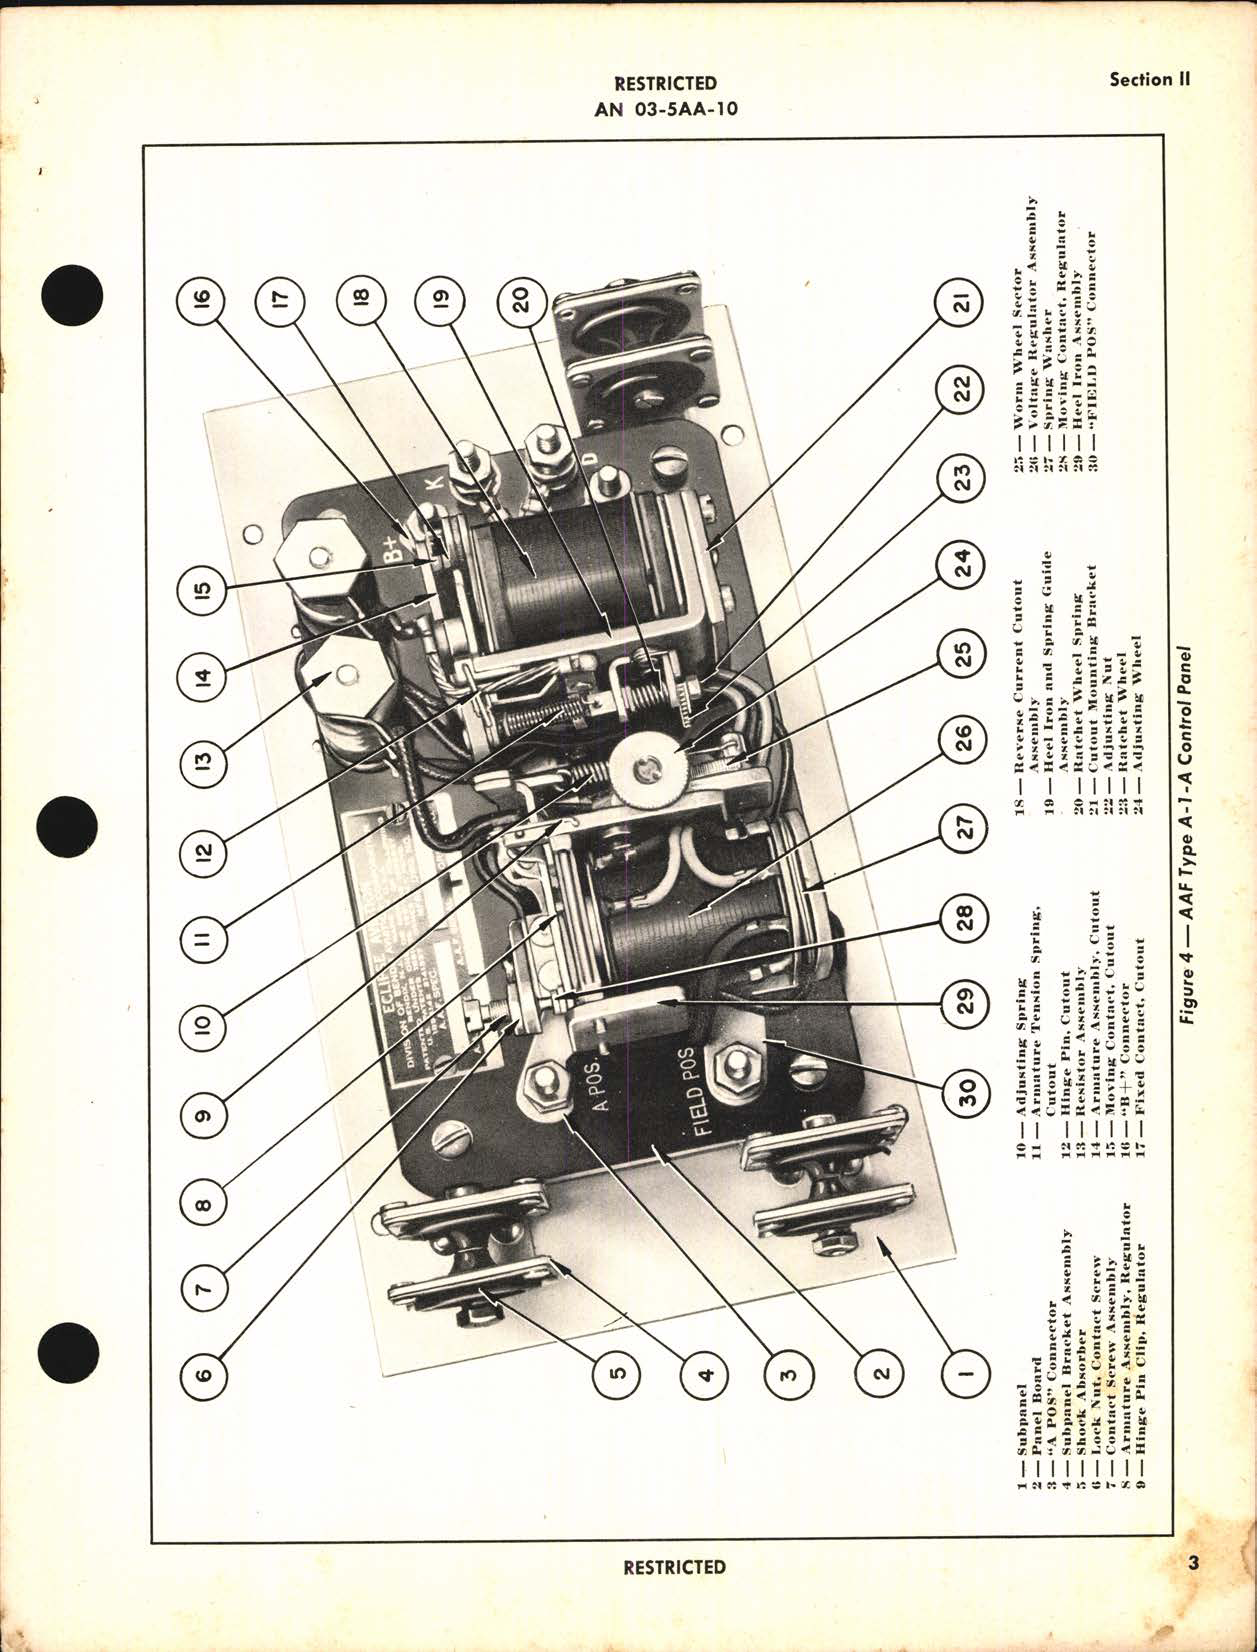 Sample page 7 from AirCorps Library document: Handbook of Instructions with Parts Catalog for Types 323 and 340 D-C Generator Control Panels